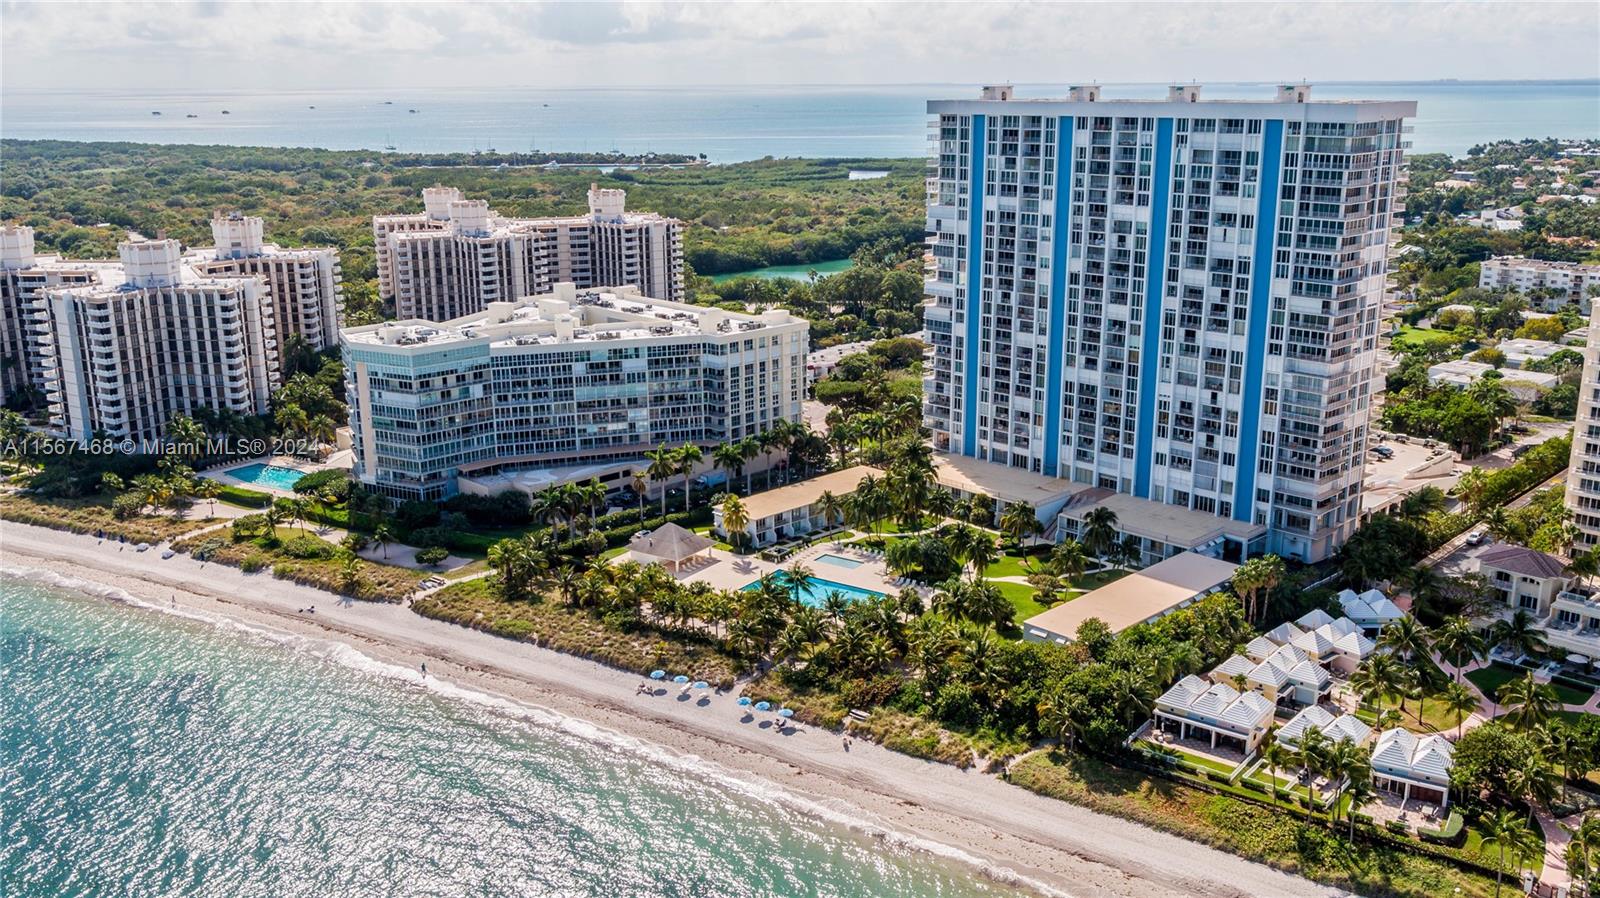 Rarely available ocean front Townhome just few steps from the beach & pool. Updated, new floors & new furniture, 2 beds, 2 baths, fully FURNISHED, washer/dryer inside the unit, 1 assigned parking space. Located at the luxury complex at Key Biscayne, full service 24-hour security building with all the amenities. Relaxed beach living this amazing location! Available only from June 01, 2024 until September 30, 2024 (4 months).